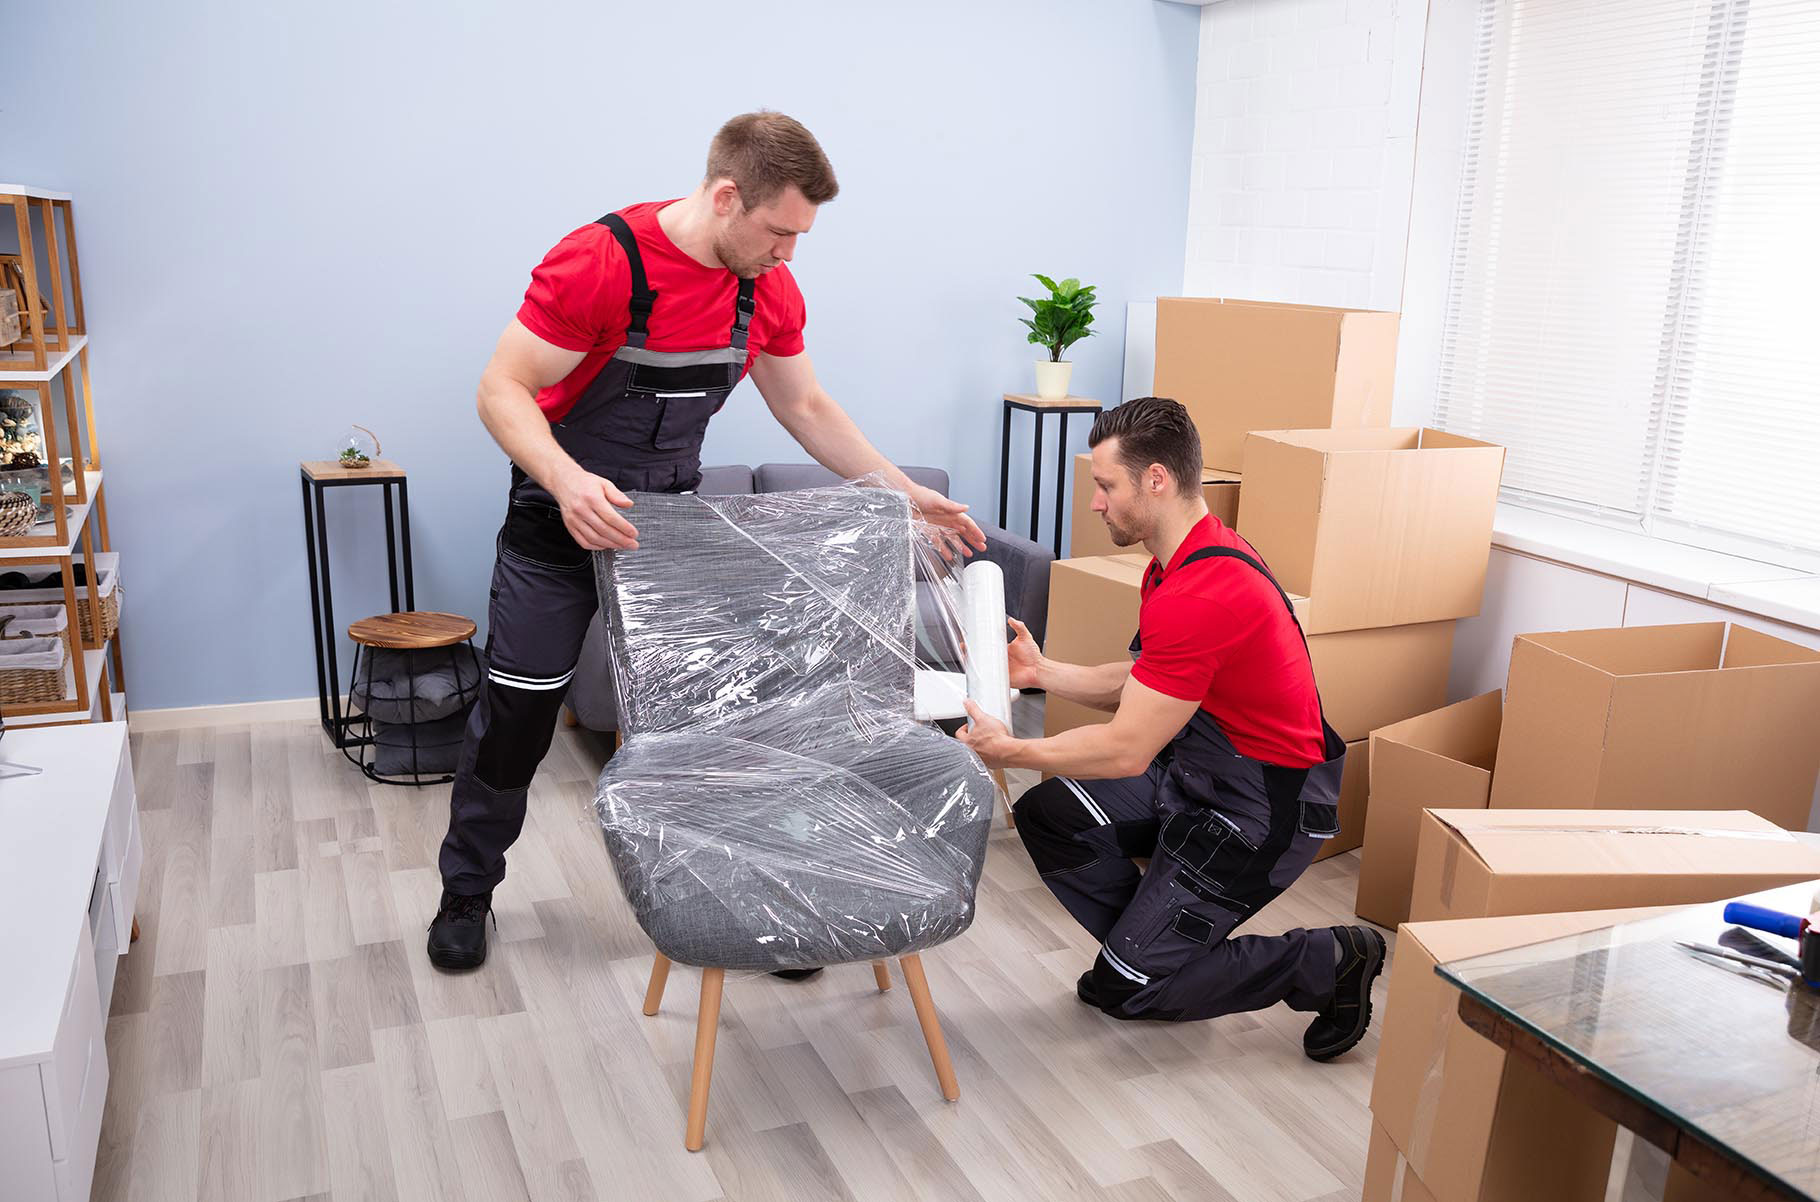 Getting a Furniture Removal Team to Help You With Furniture Donation